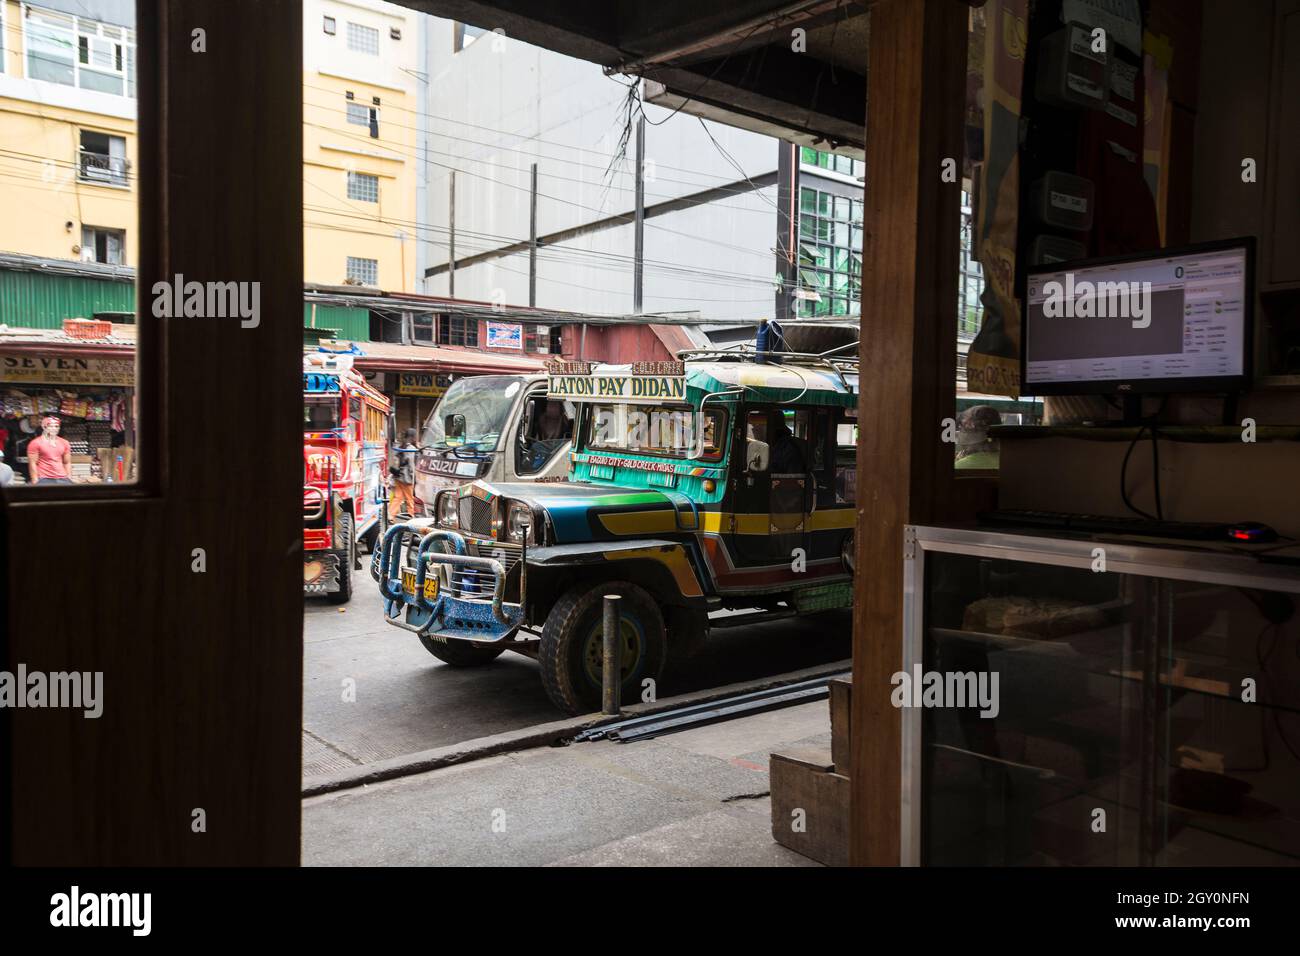 View from a shop on a street with passing jeepneys in Baguio, Philippines Stock Photo